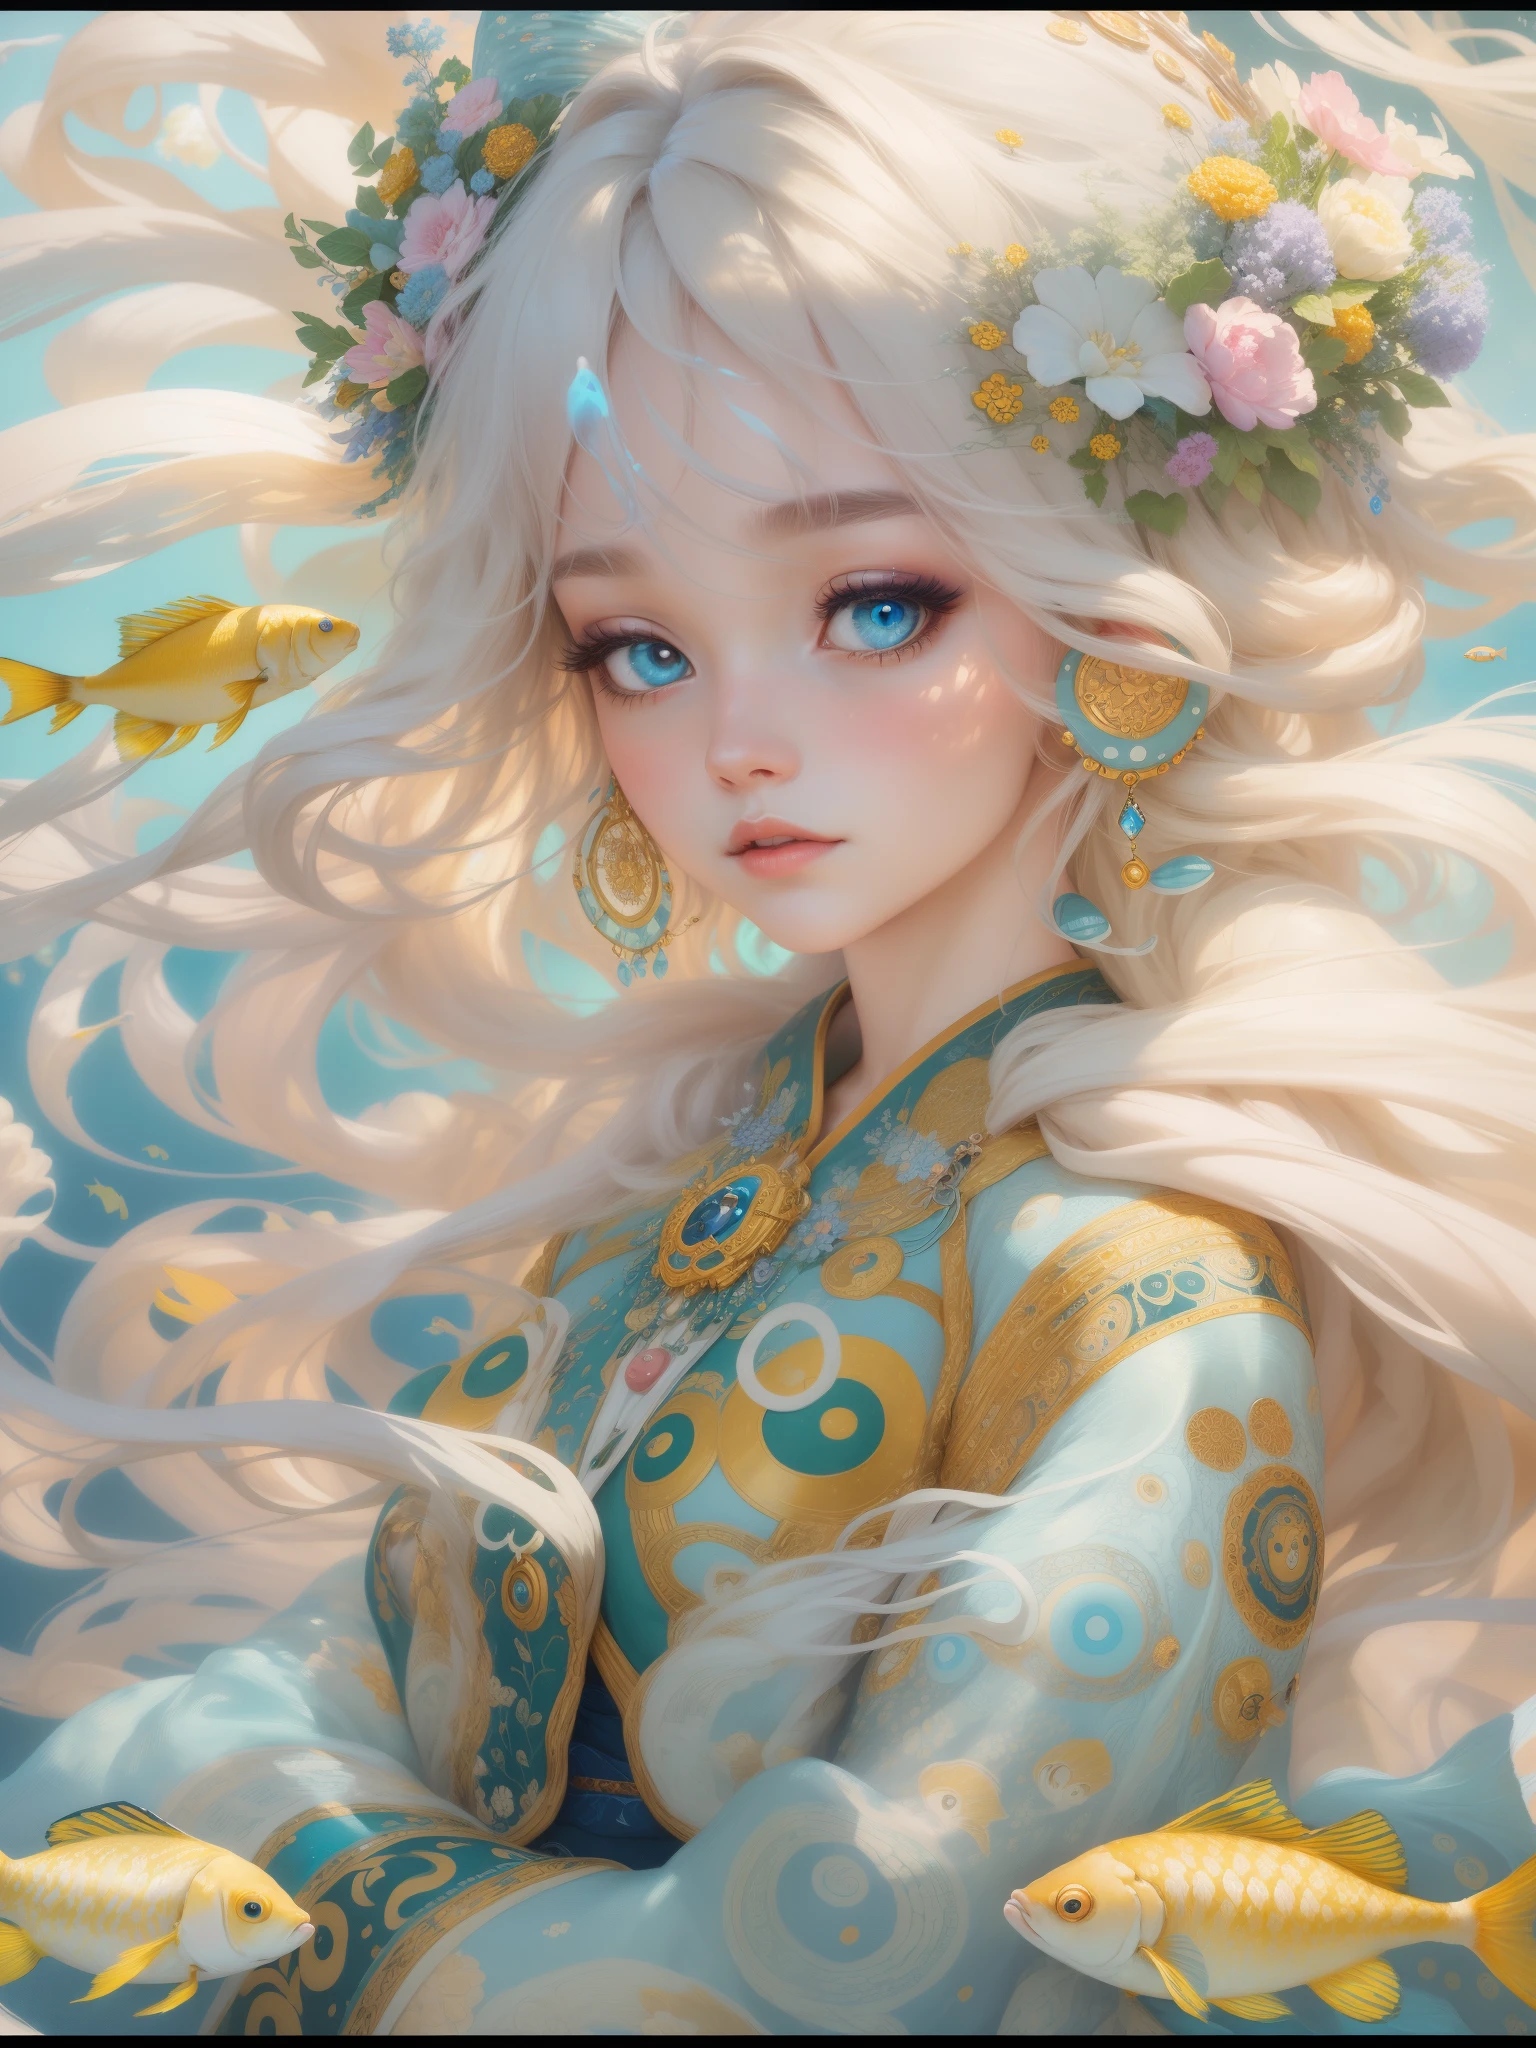 (The most realistic, 4K, A high resolution, tmasterpiece:1.2), Paintwork, Fantasyart:1.37, Sky with fluffy clouds:1.37, (sad cloud goddess:1.37, eyes with brightness, light colors hair, Elaborate makeup, Glowing skin, transparent costume, surrounded by a school of fish:1.37), The light from the back window is backlighted, Artwork in the style of Gustav Klimt, Whimsical art style, In Baiyun Paradise, beautiful fantasy art portrait